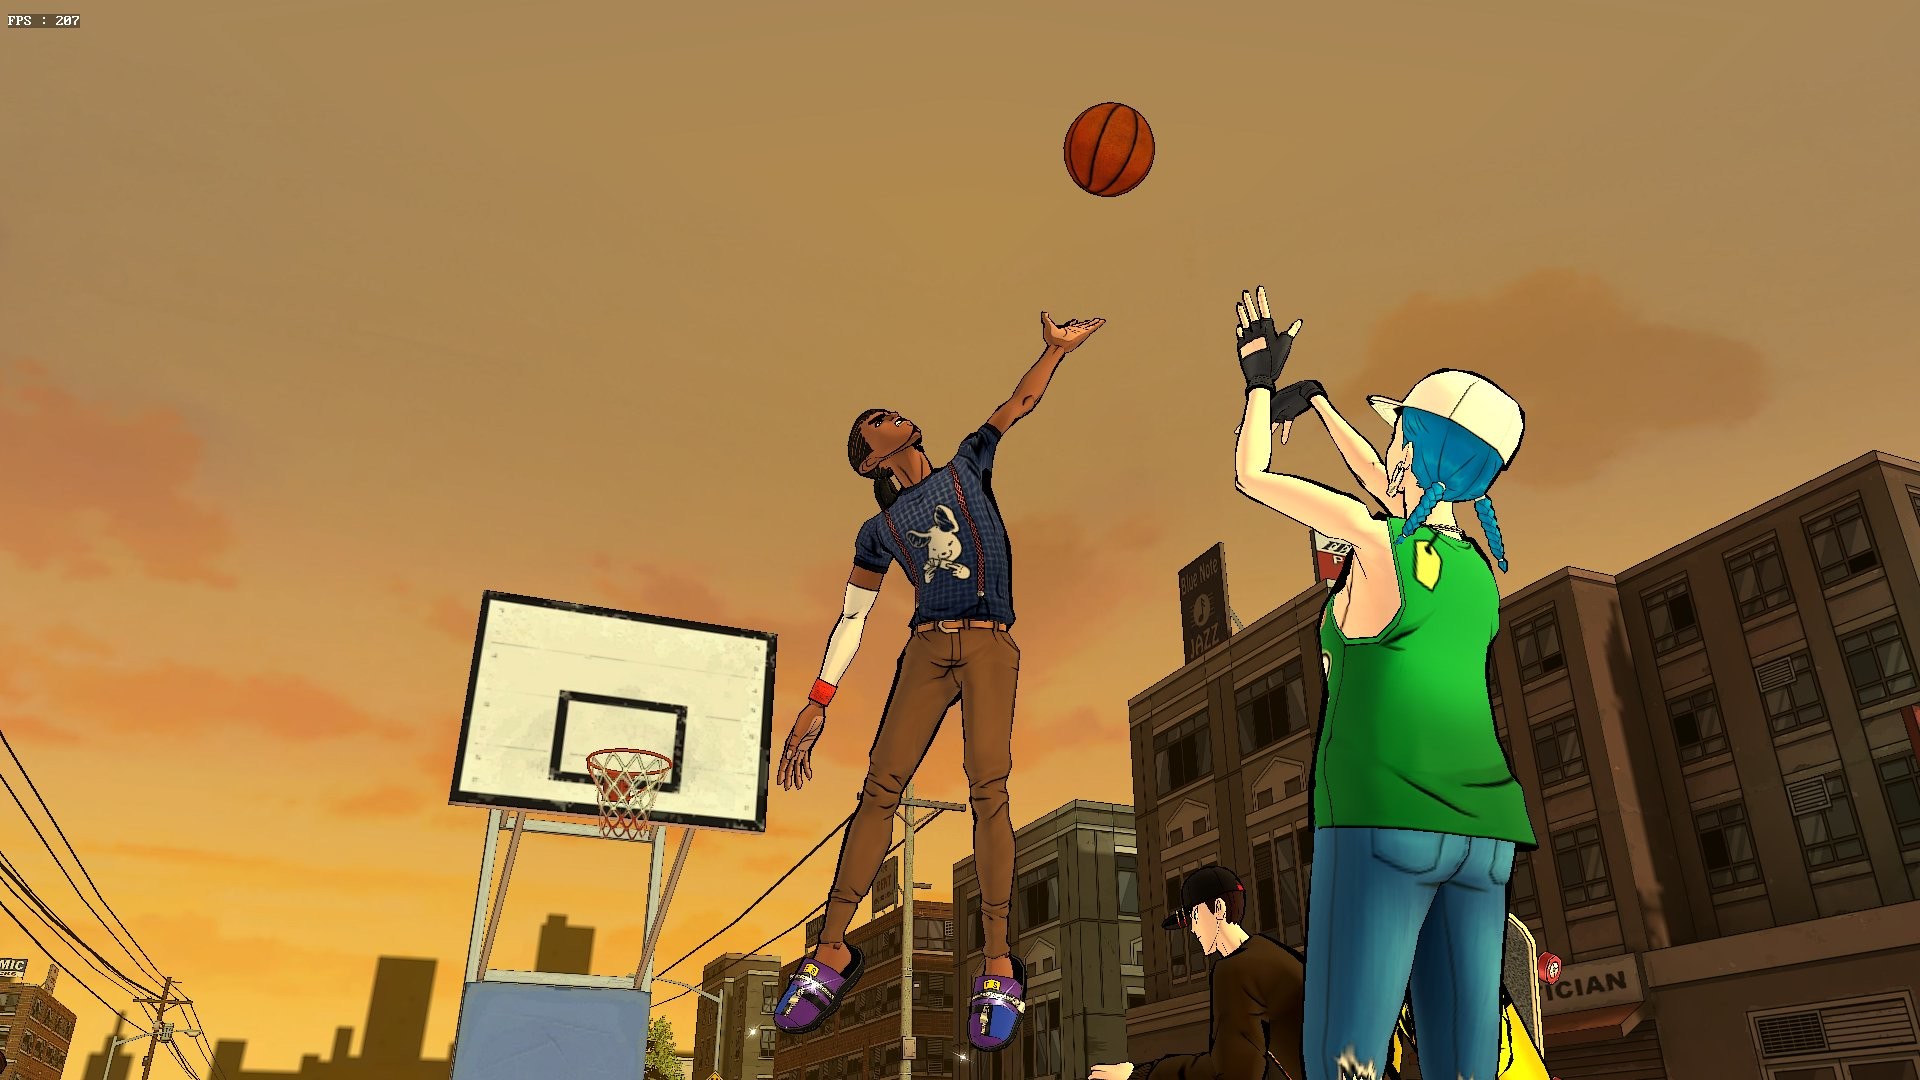 Freestyle: Street Basketball (Gameplay) Free Online PC Game 